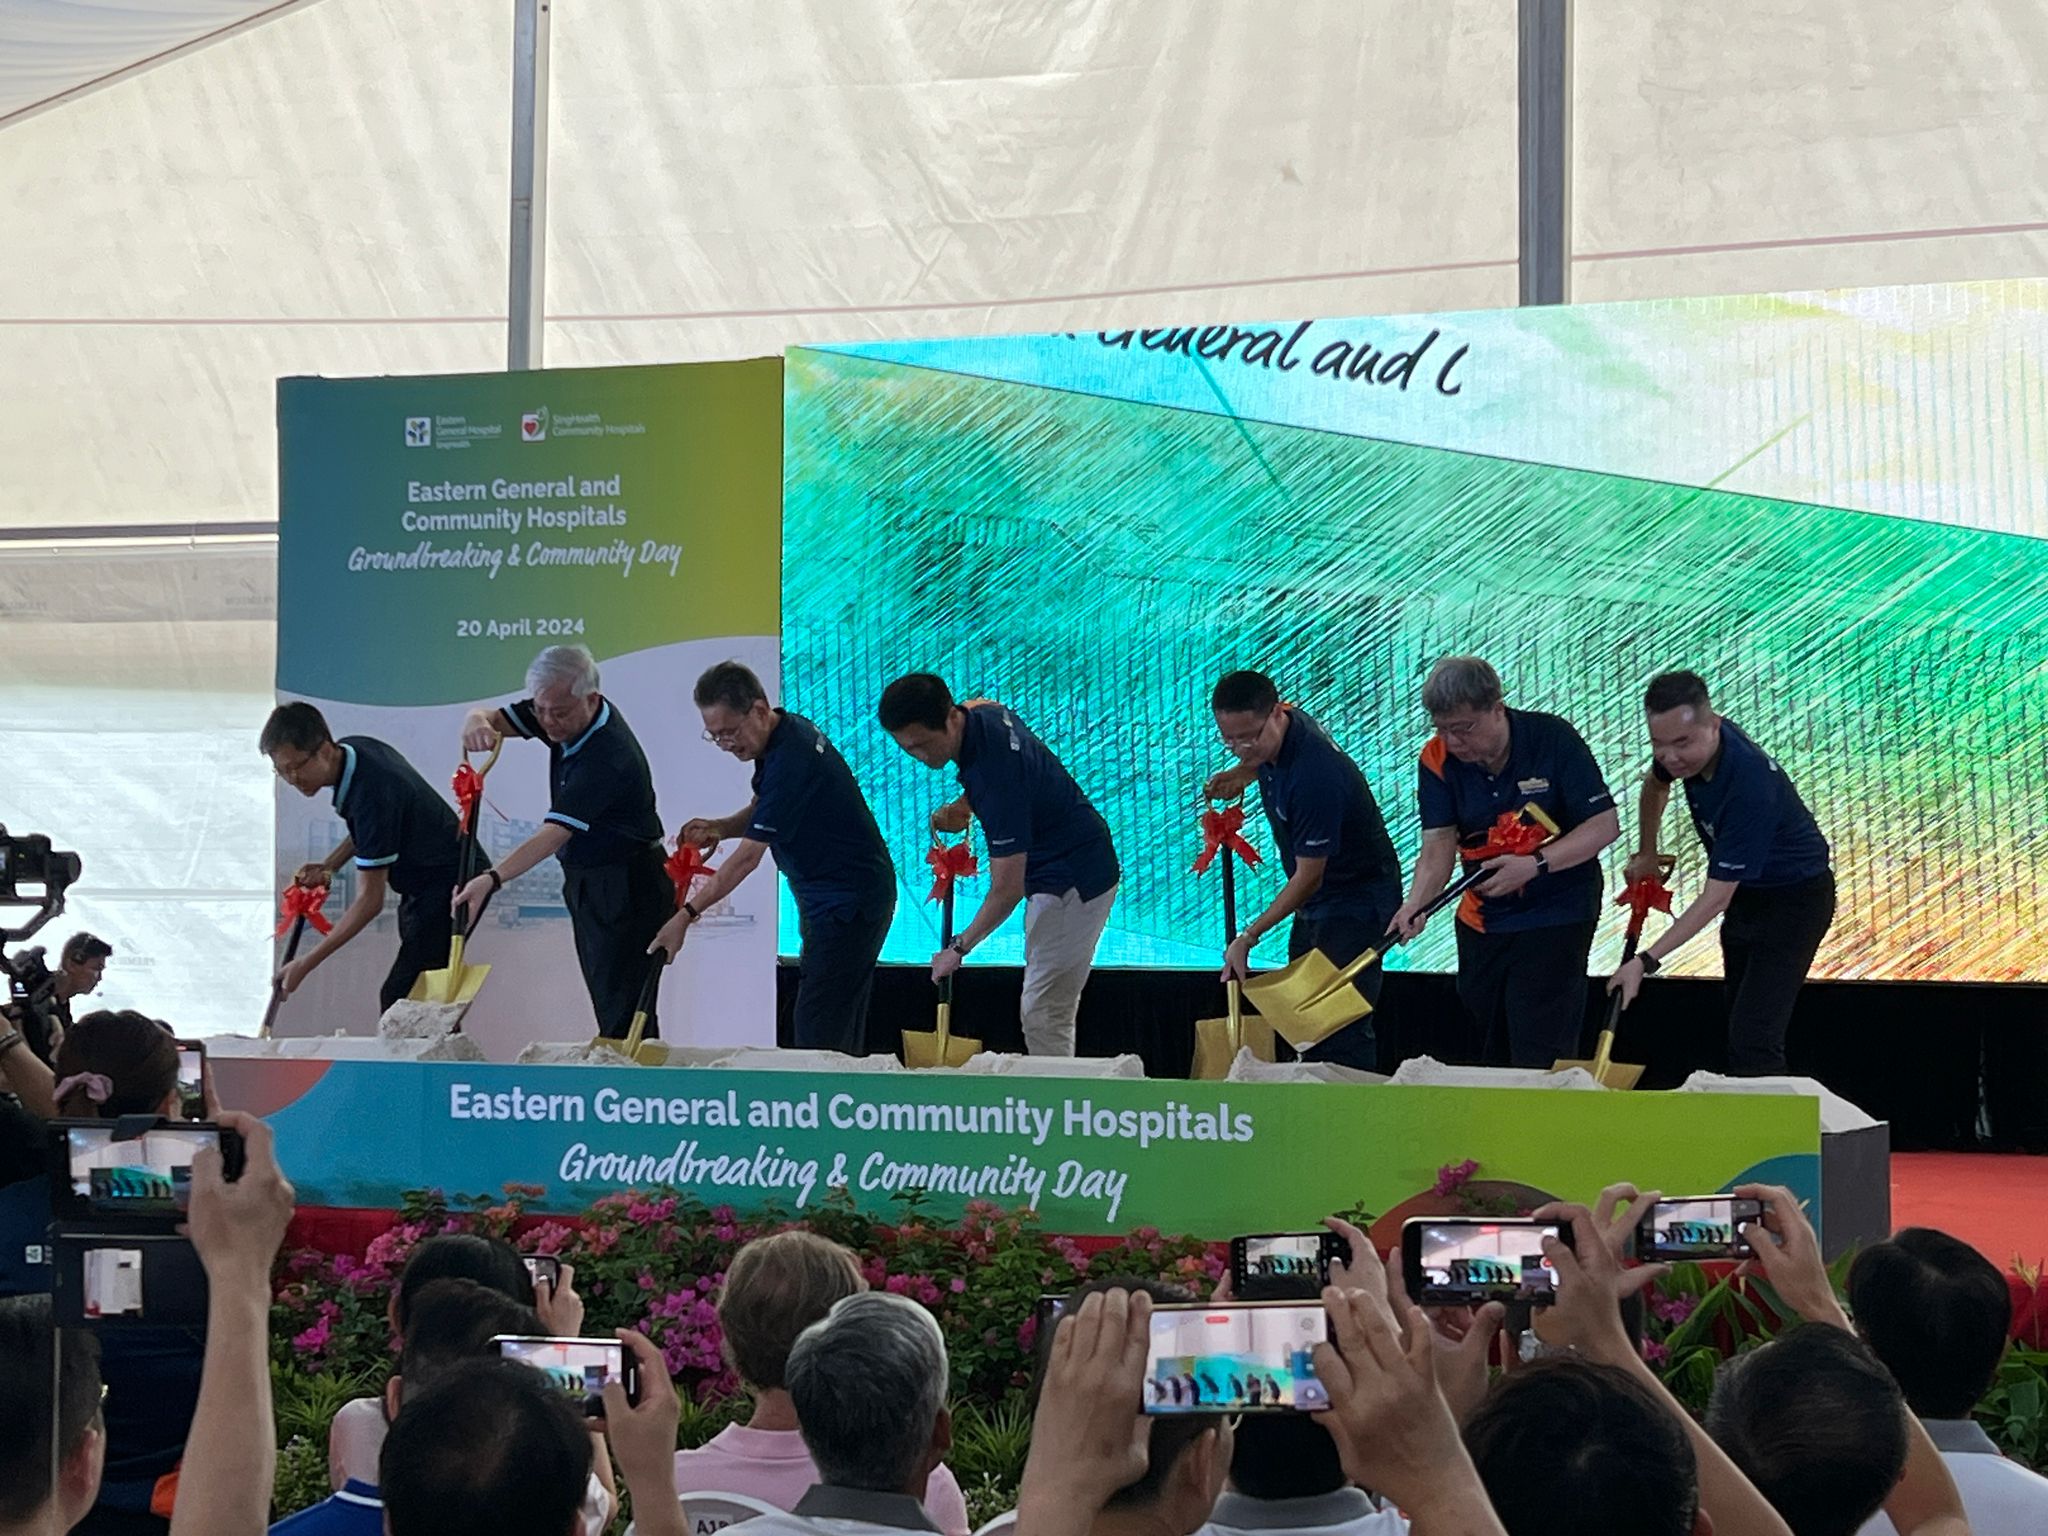 EGH Ground Breaking ceremony and Community Day 2024